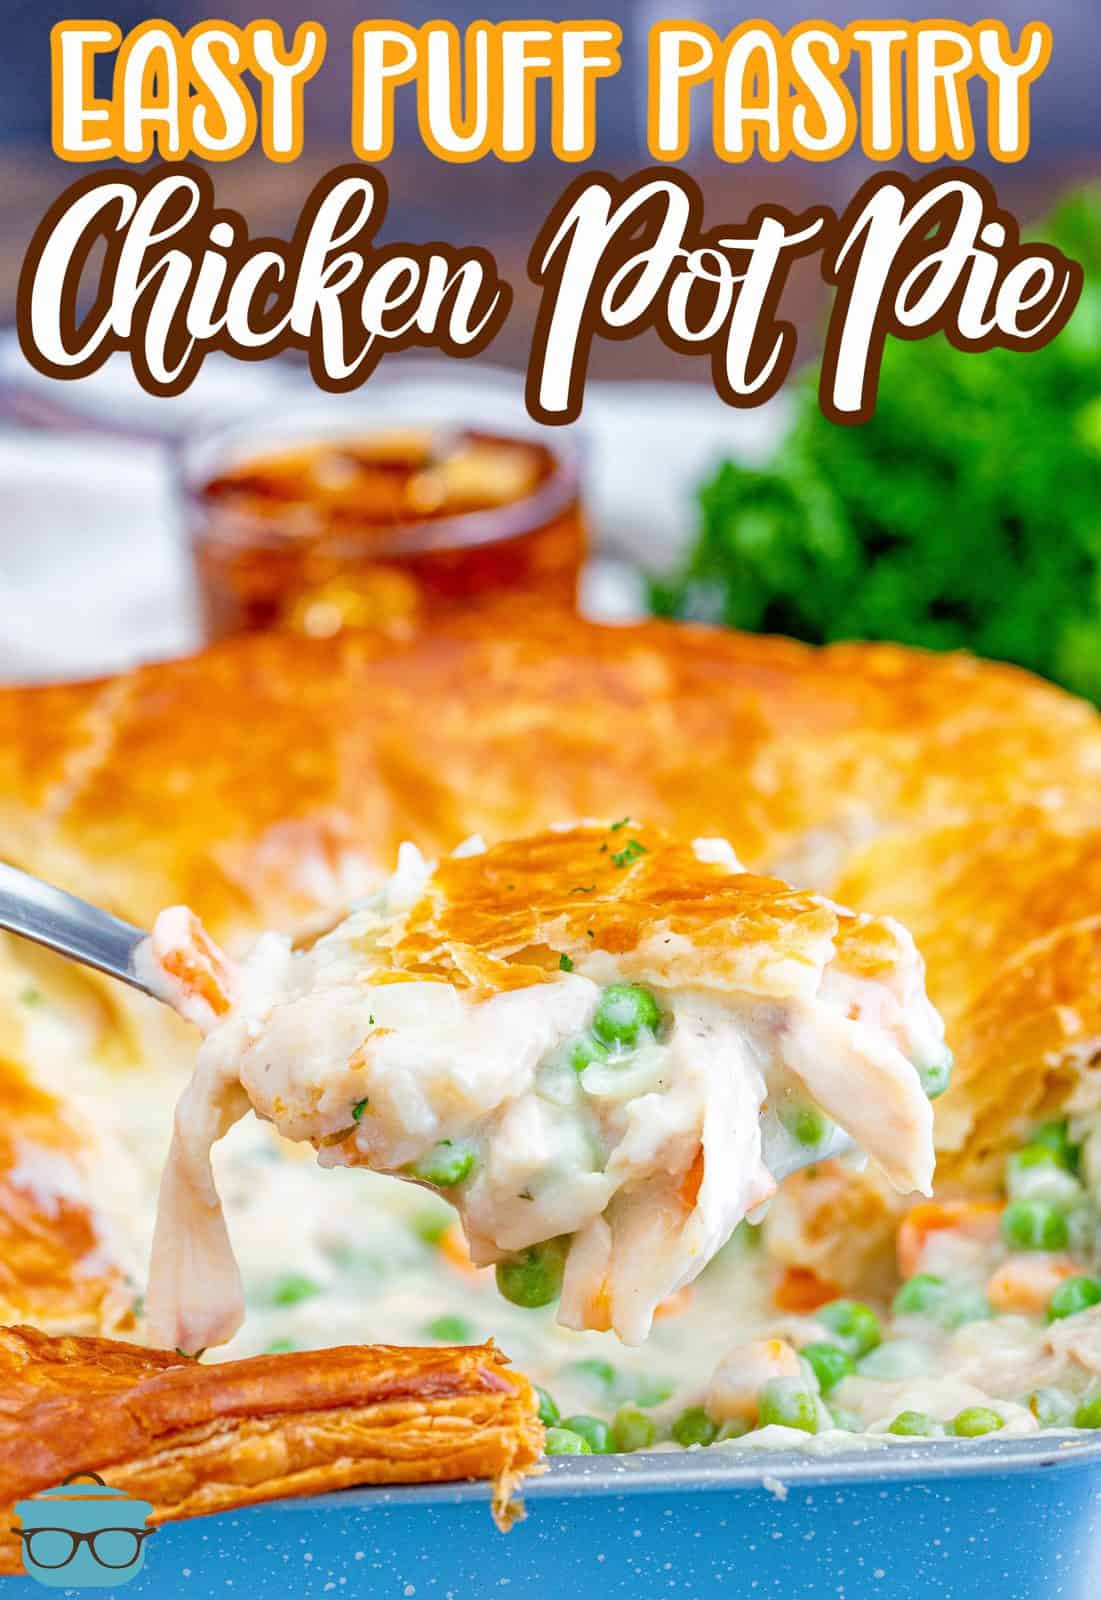 Serving spoon holding up some of the Puff Pastry Chicken Pot Pie Pinterest image.